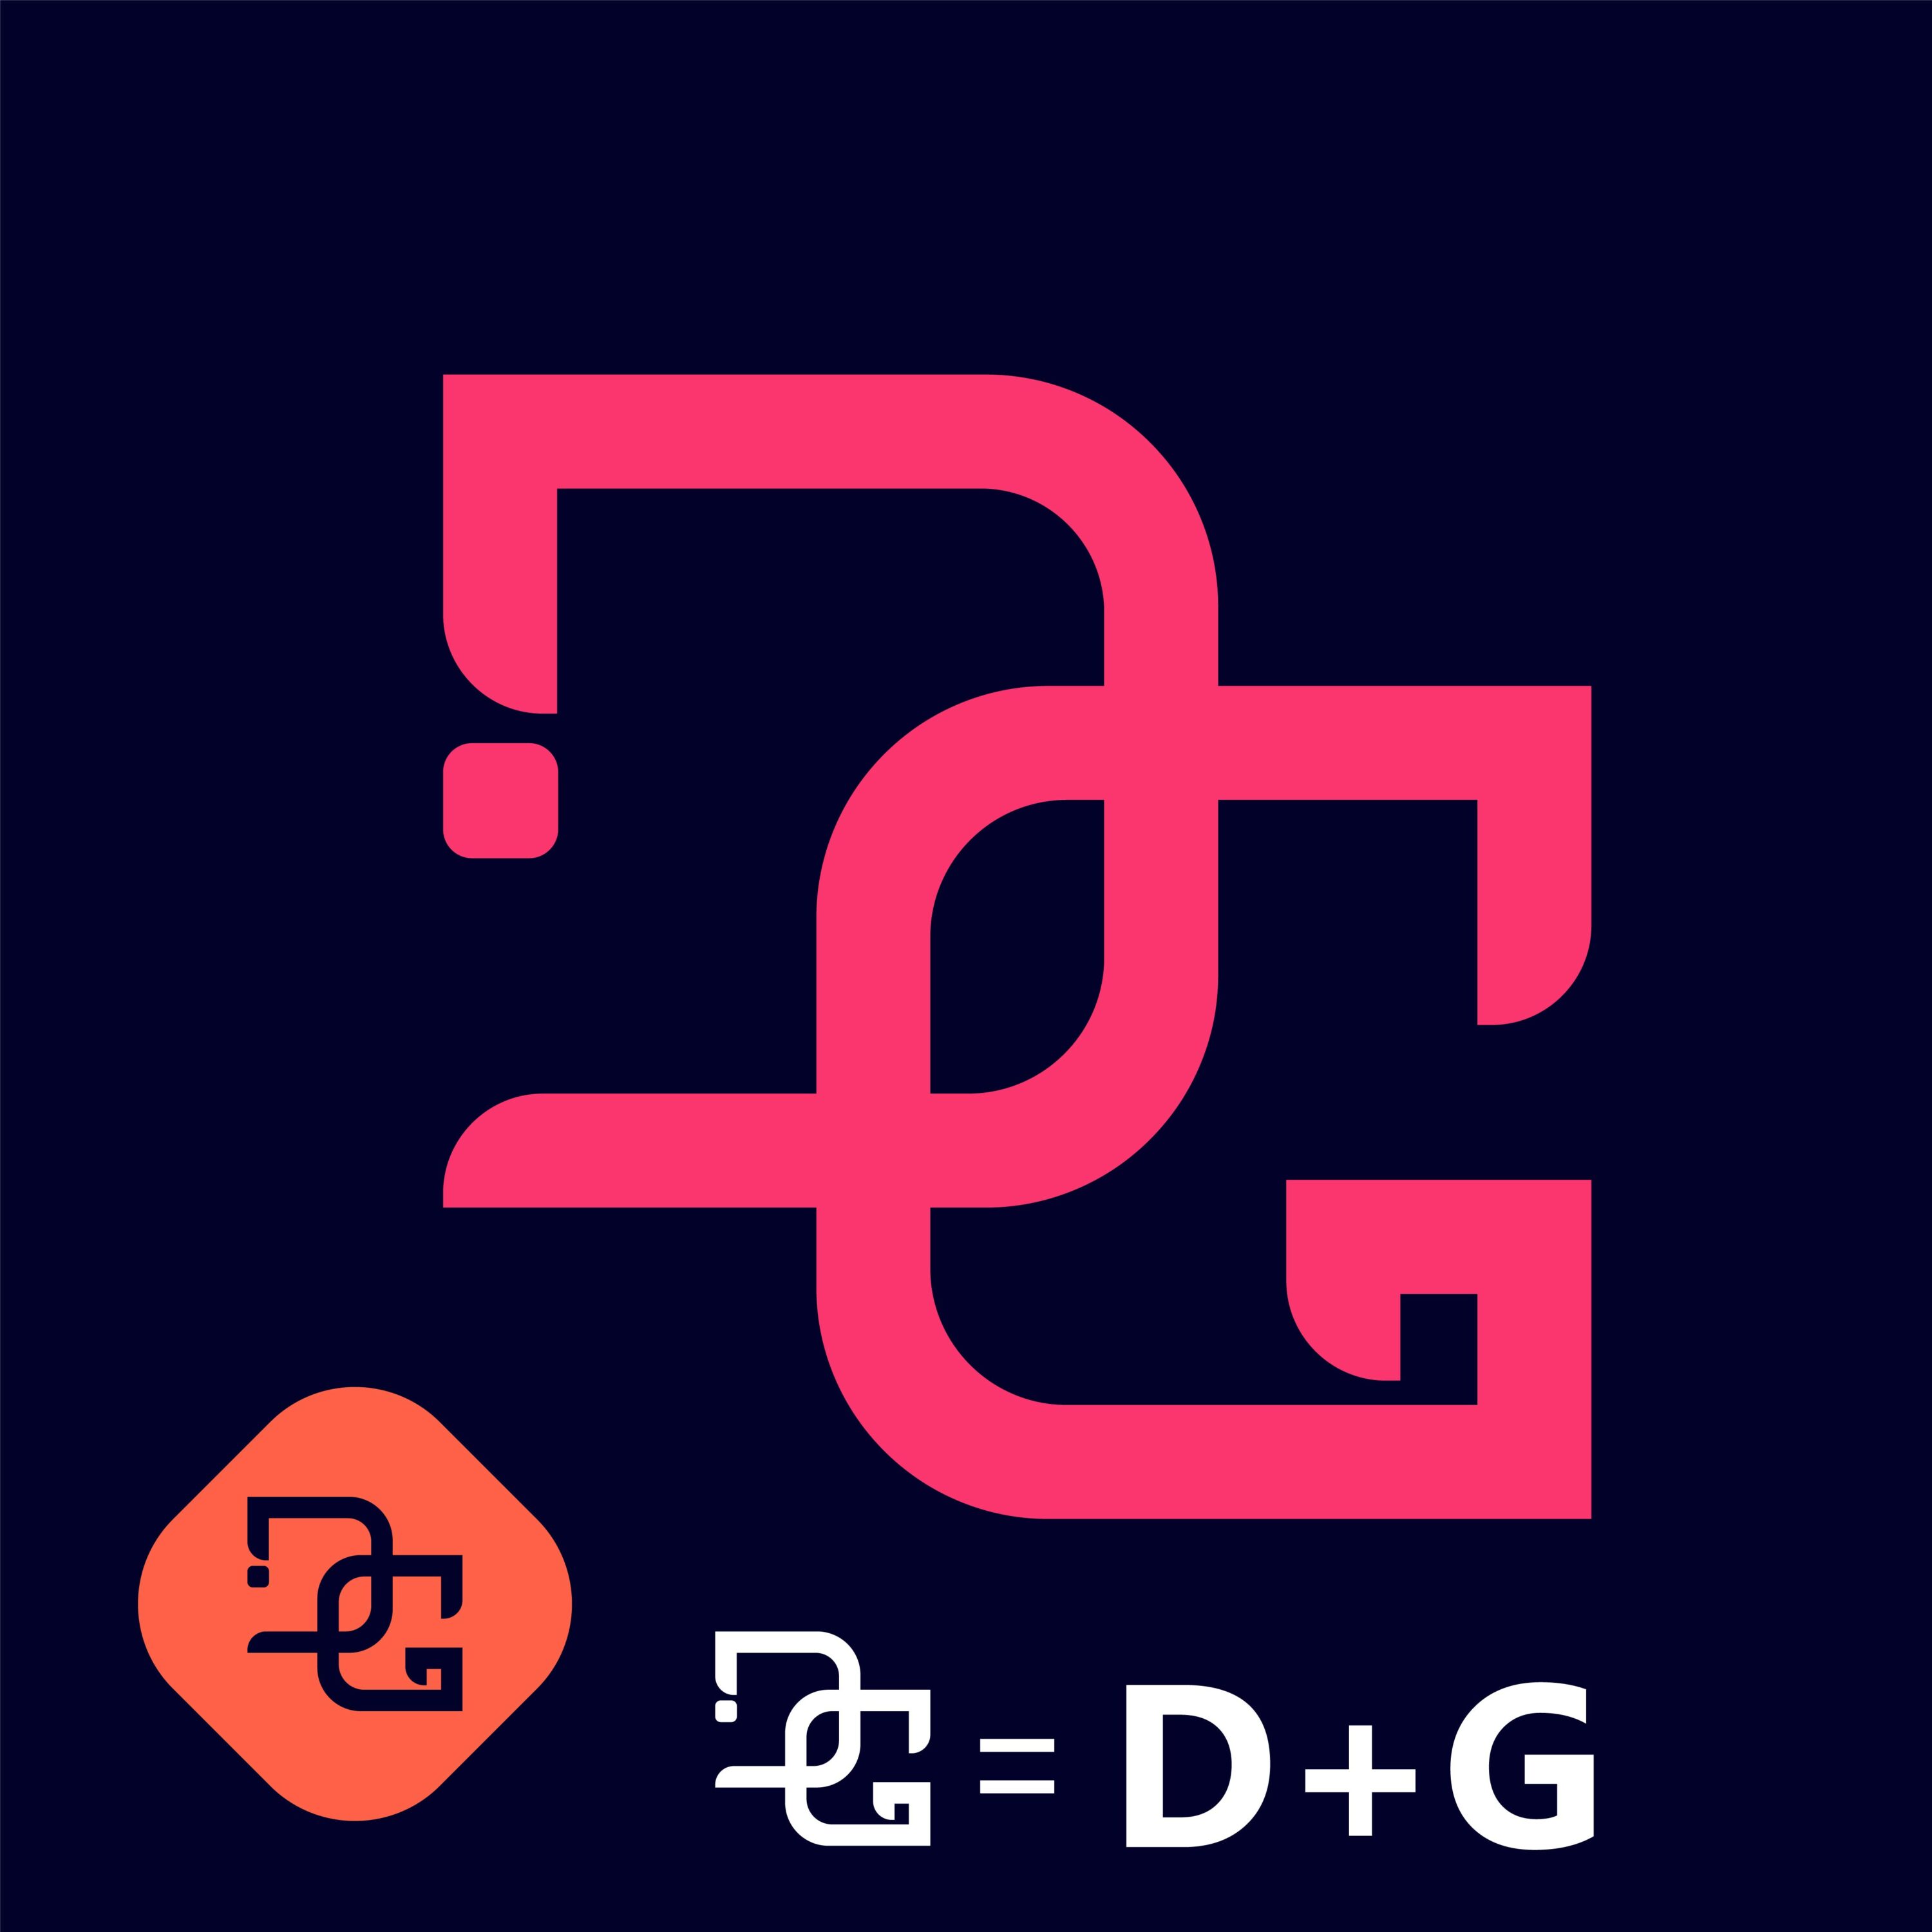 The Best Graphic Design Letter Icon Logos D G cover image.